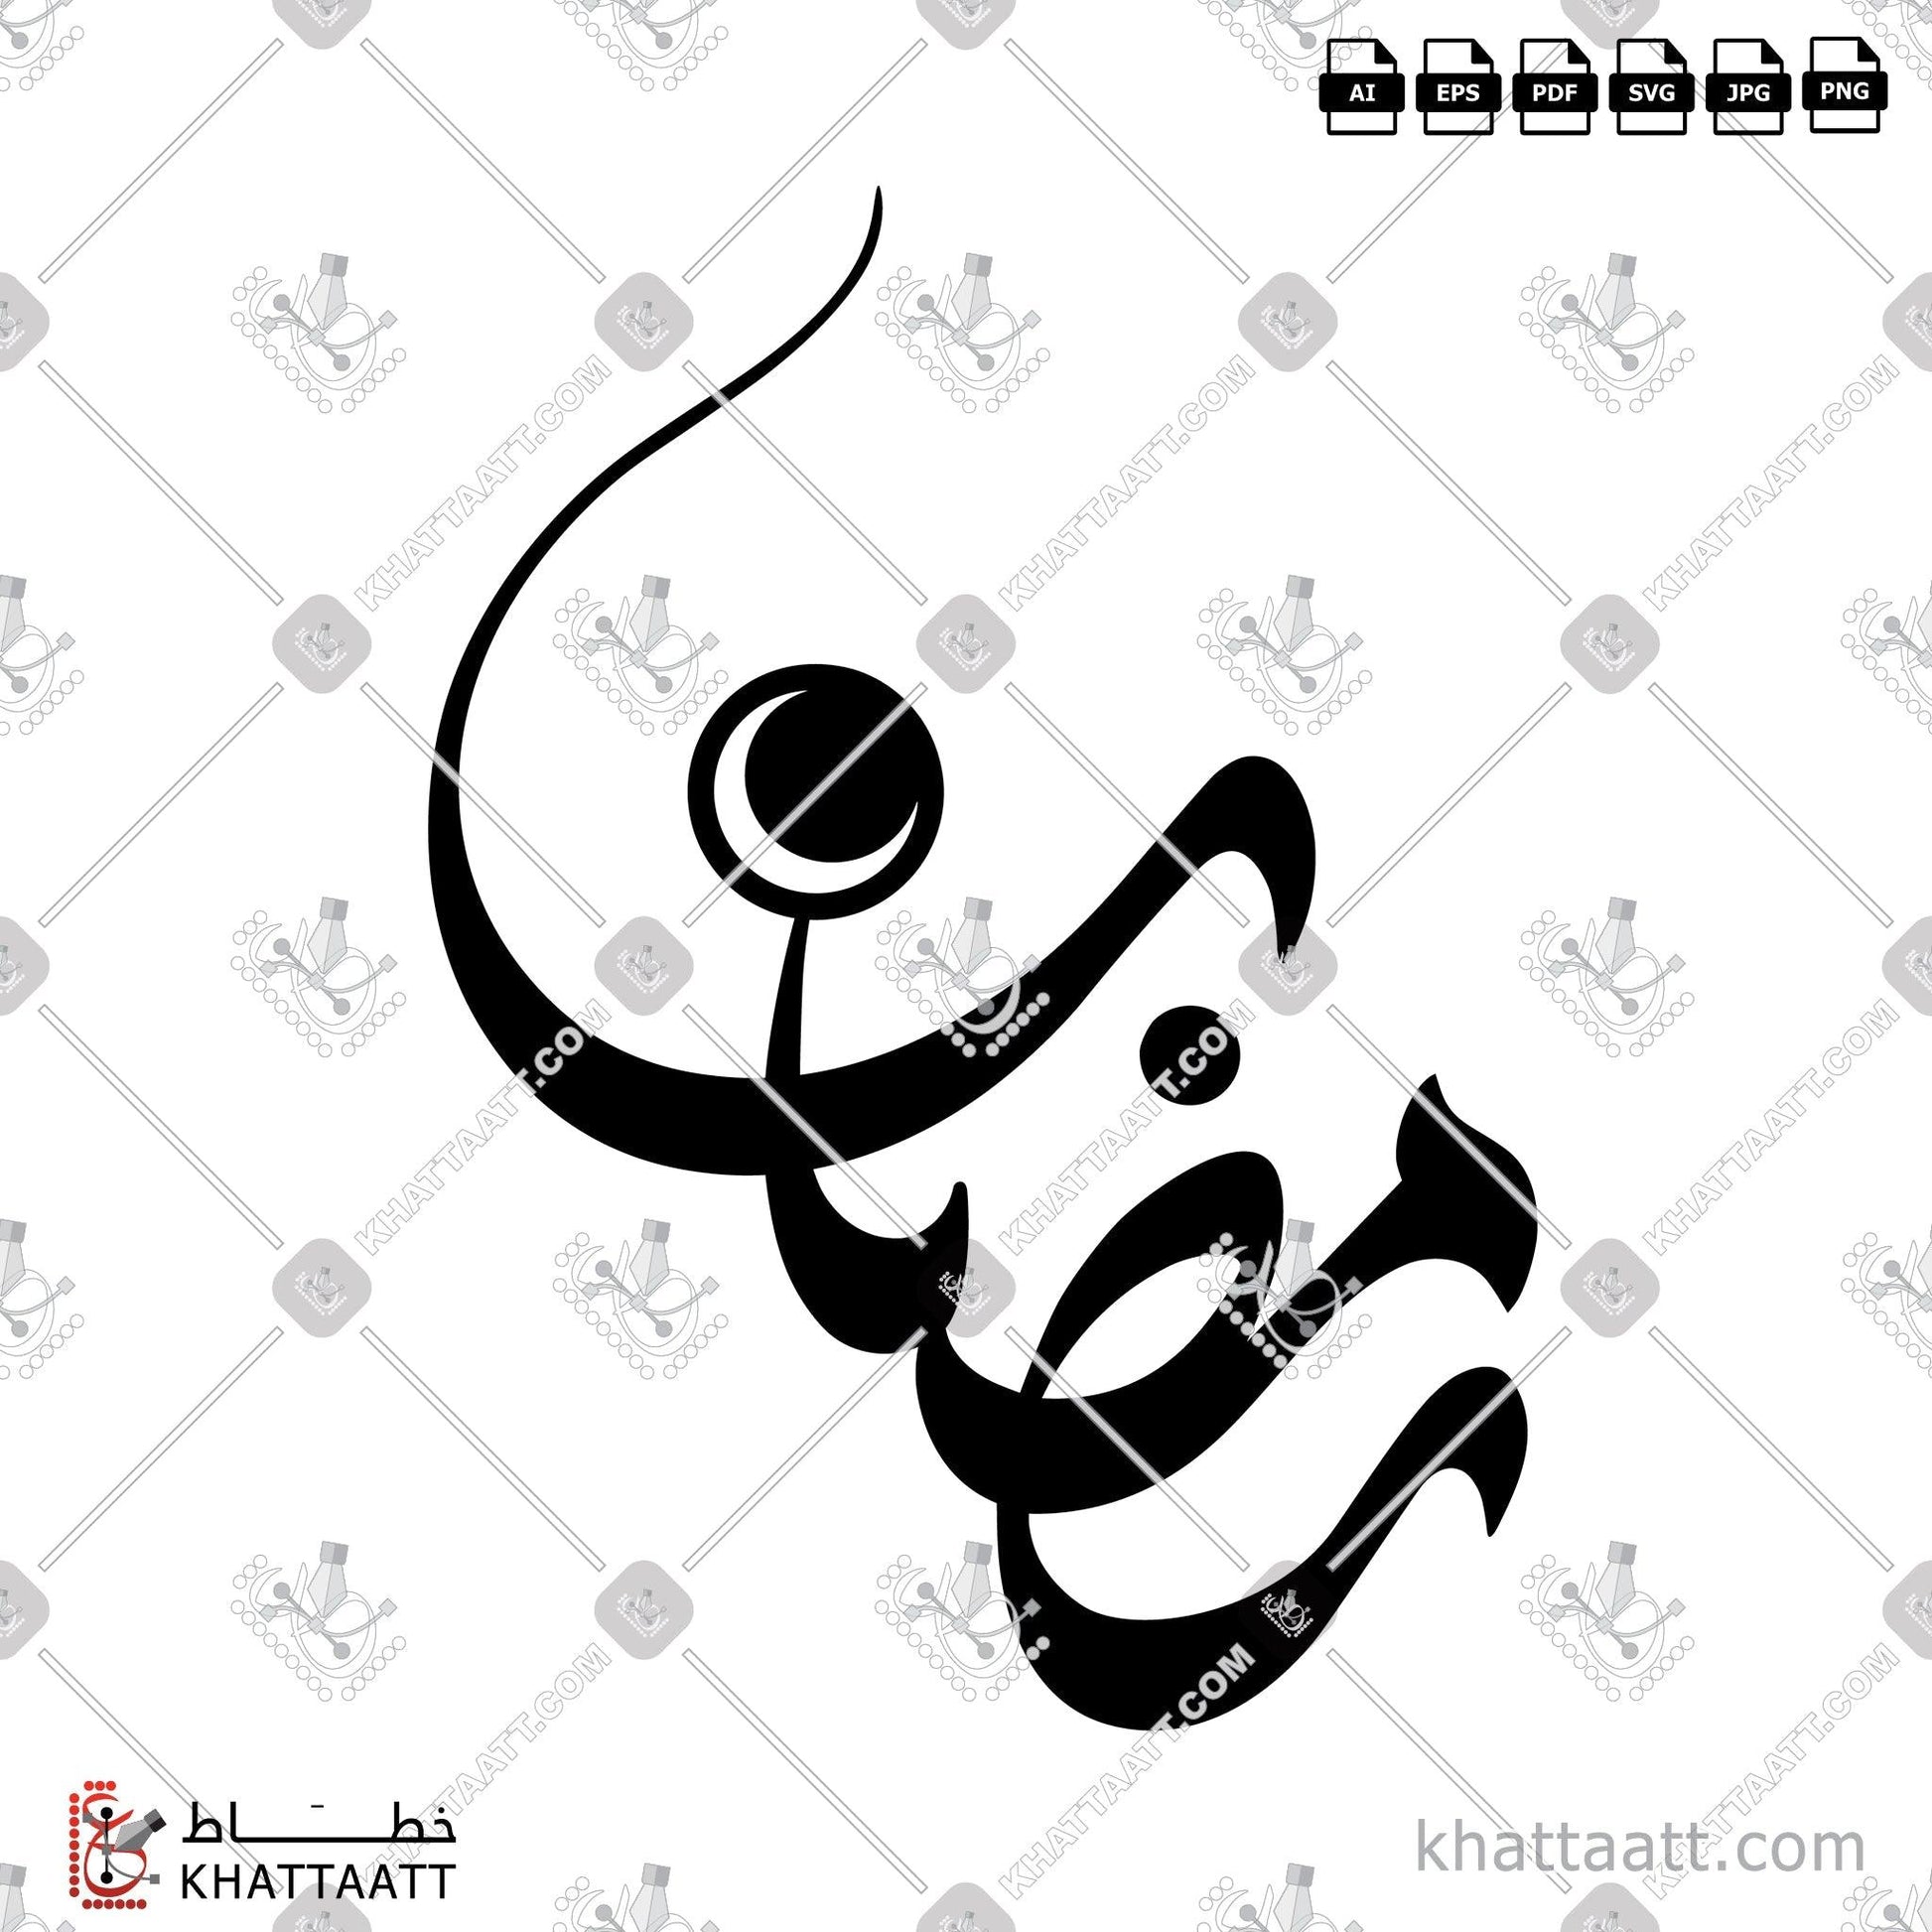 Download Arabic Calligraphy of Ramadan - رمضان in FreeStyle - الخط الحر in vector and .png